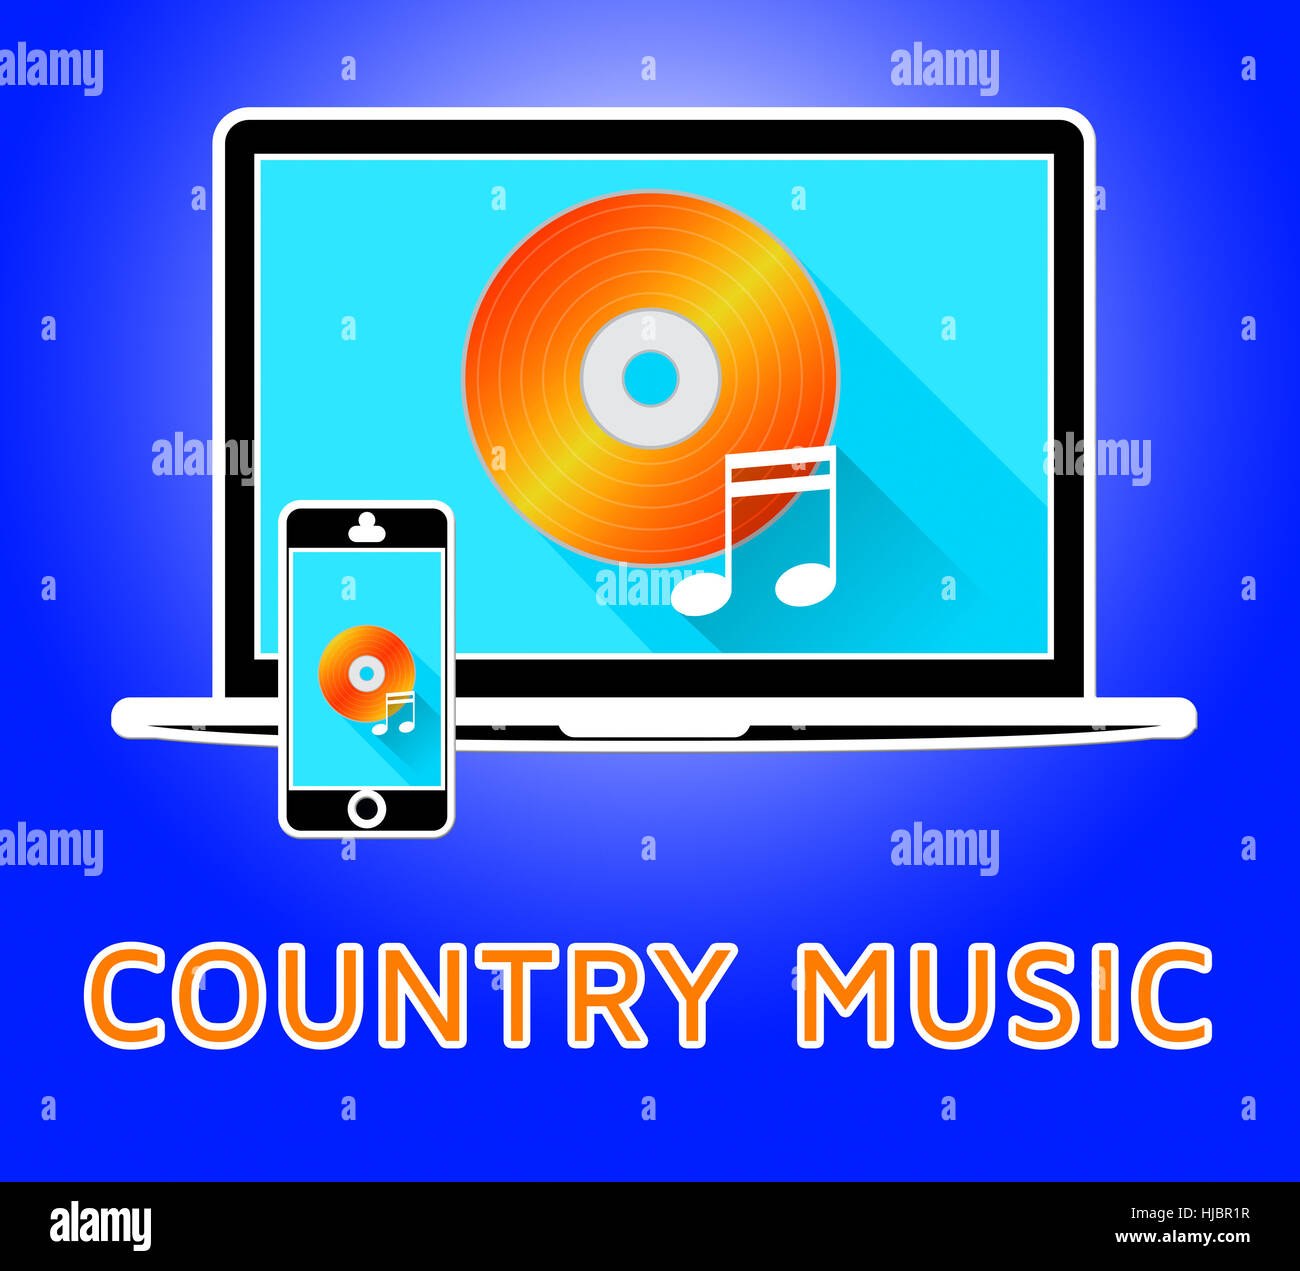 Country Music Laptop And Phone Represents Sound Tracks 3d Illustration Stock Photo